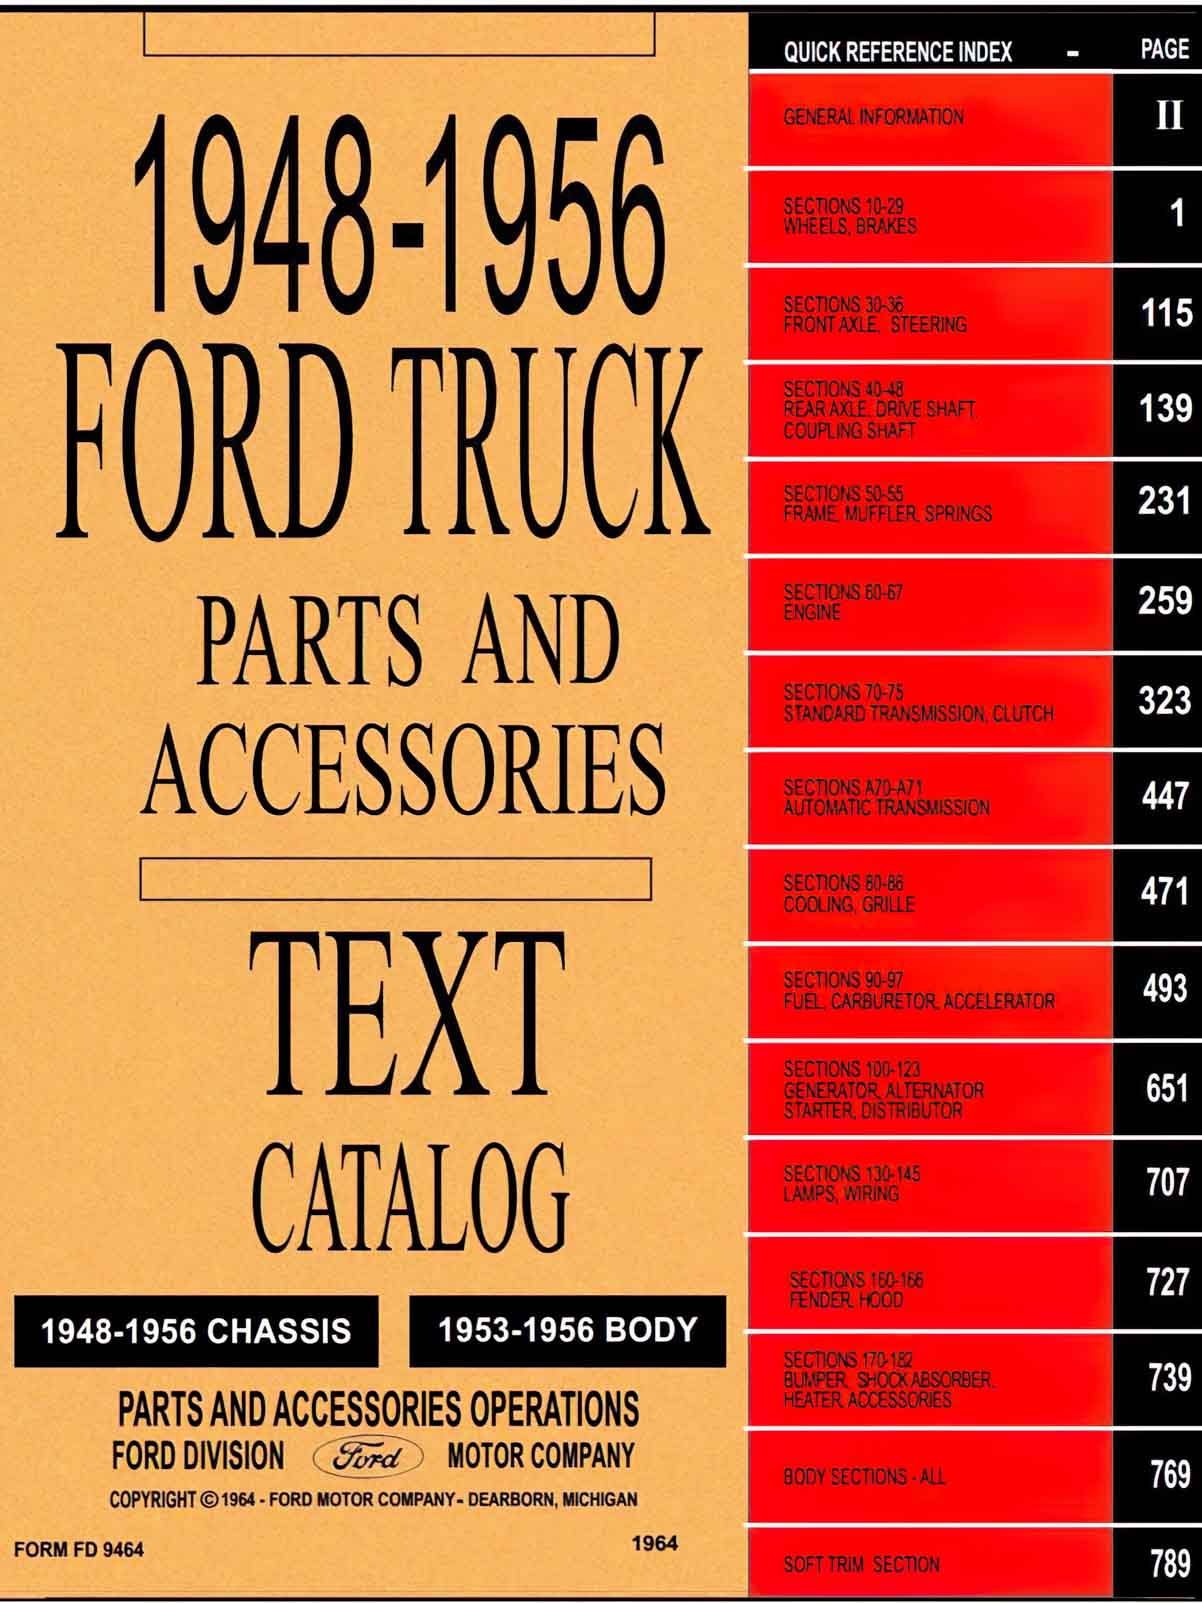 1948-1956 Ford Truck Parts Catalog